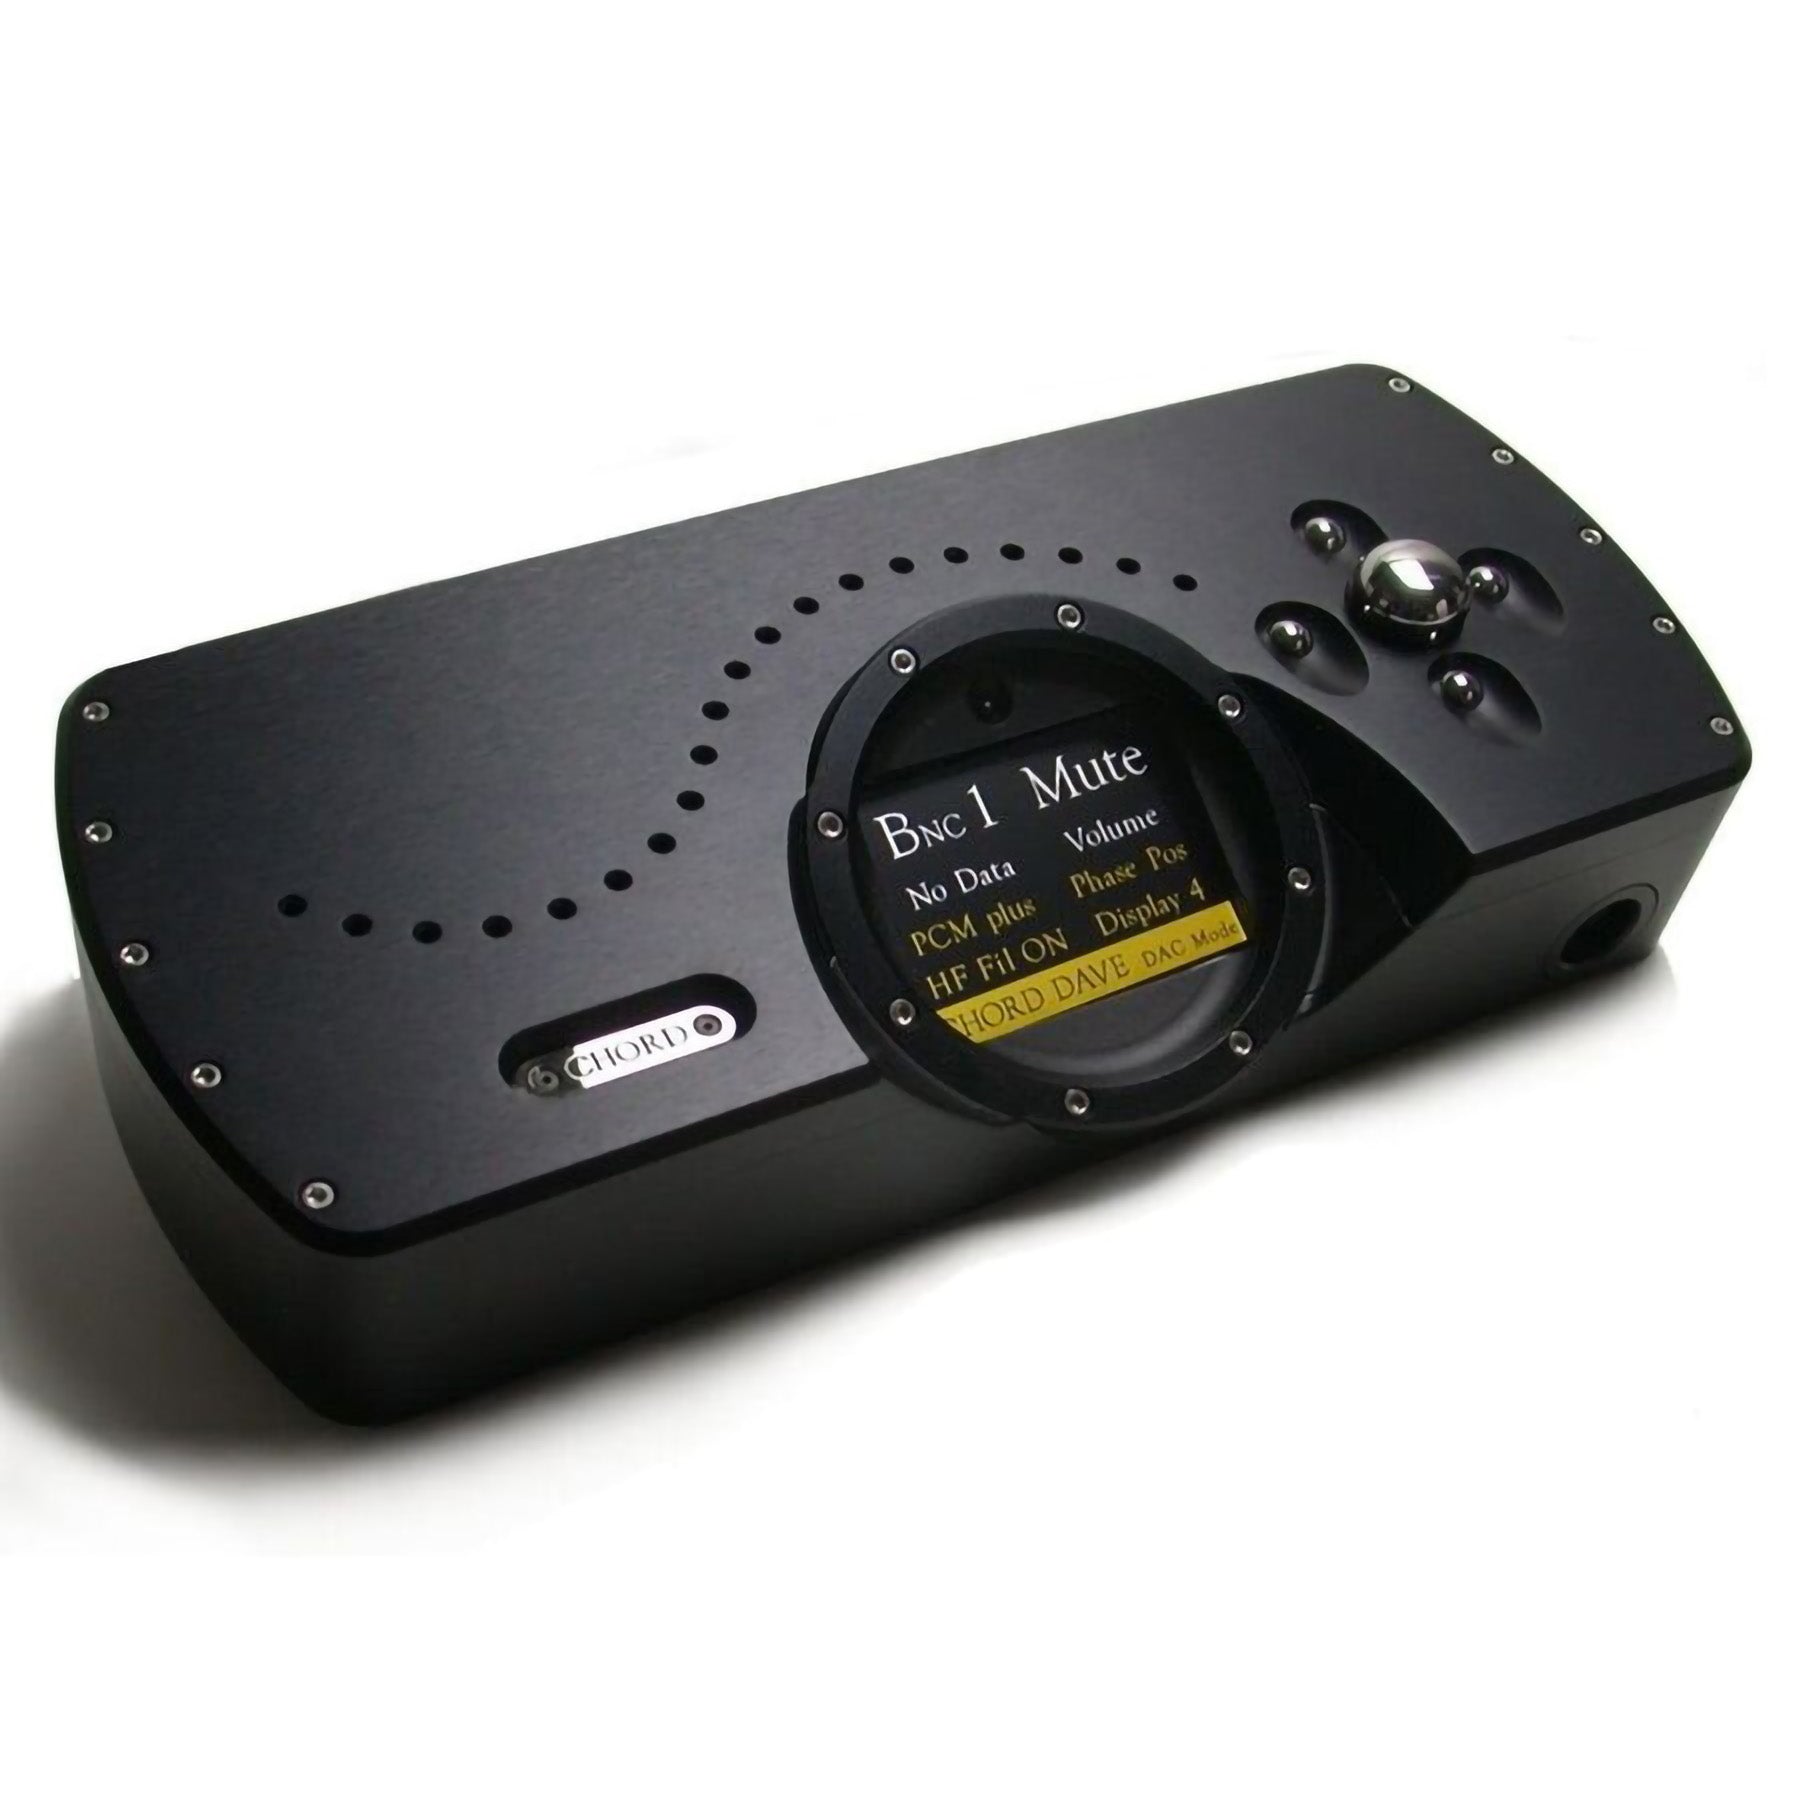 Chord Dave Reference Digital to Analogue Converter, Headphone Amplifier and Preamplifier